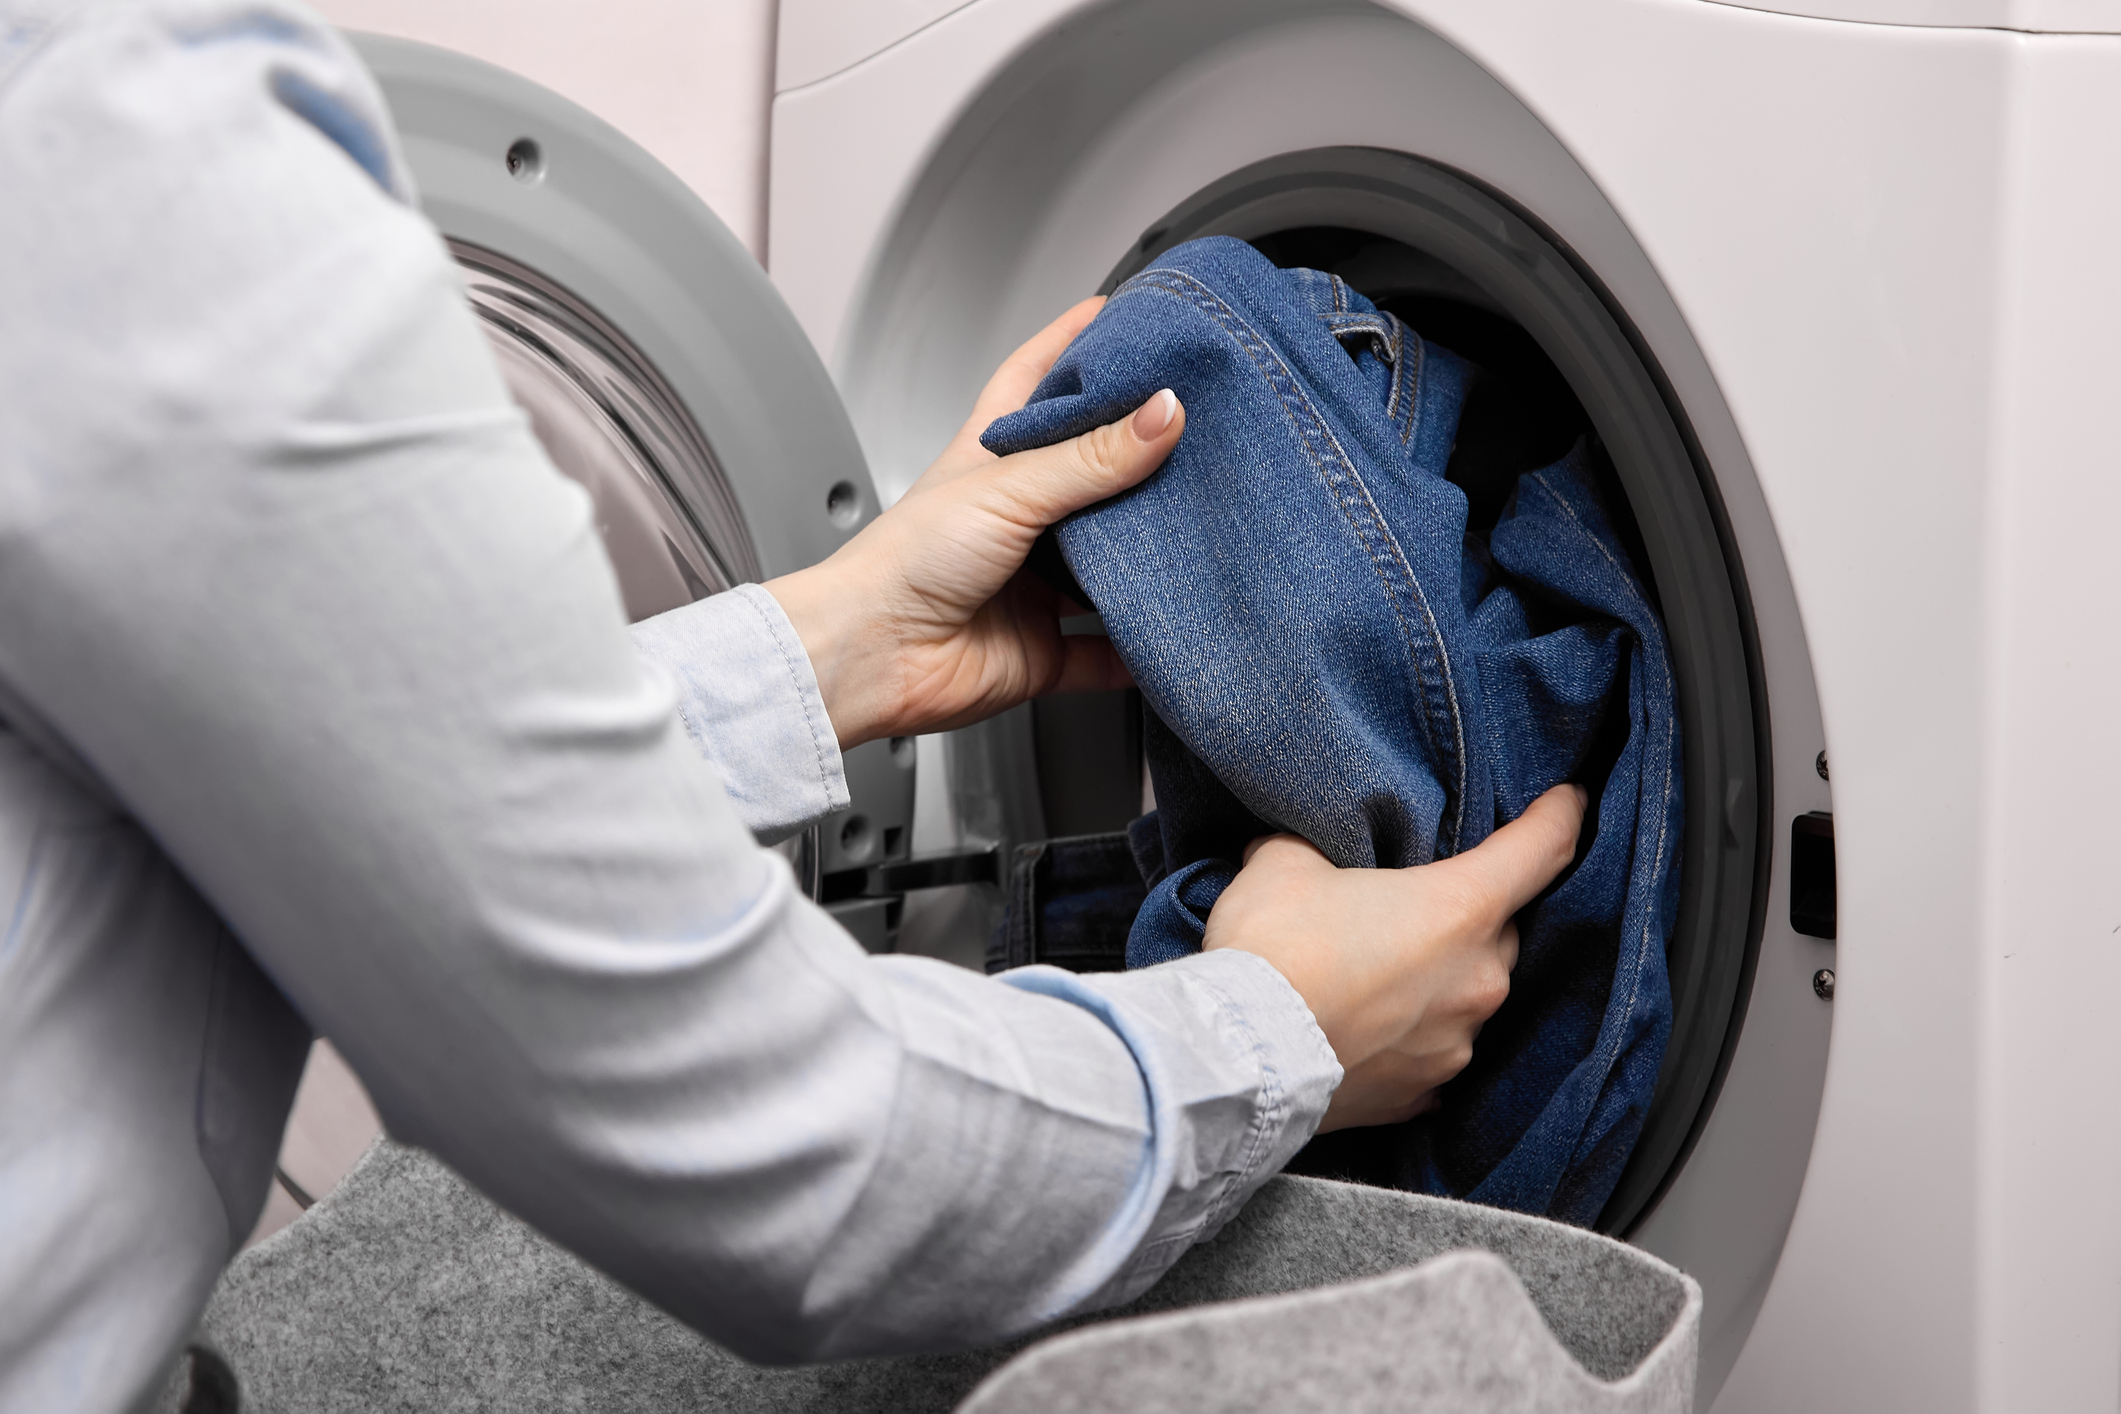 Make Your Laundry Experience a Breeze at Abe's Coin Laundry